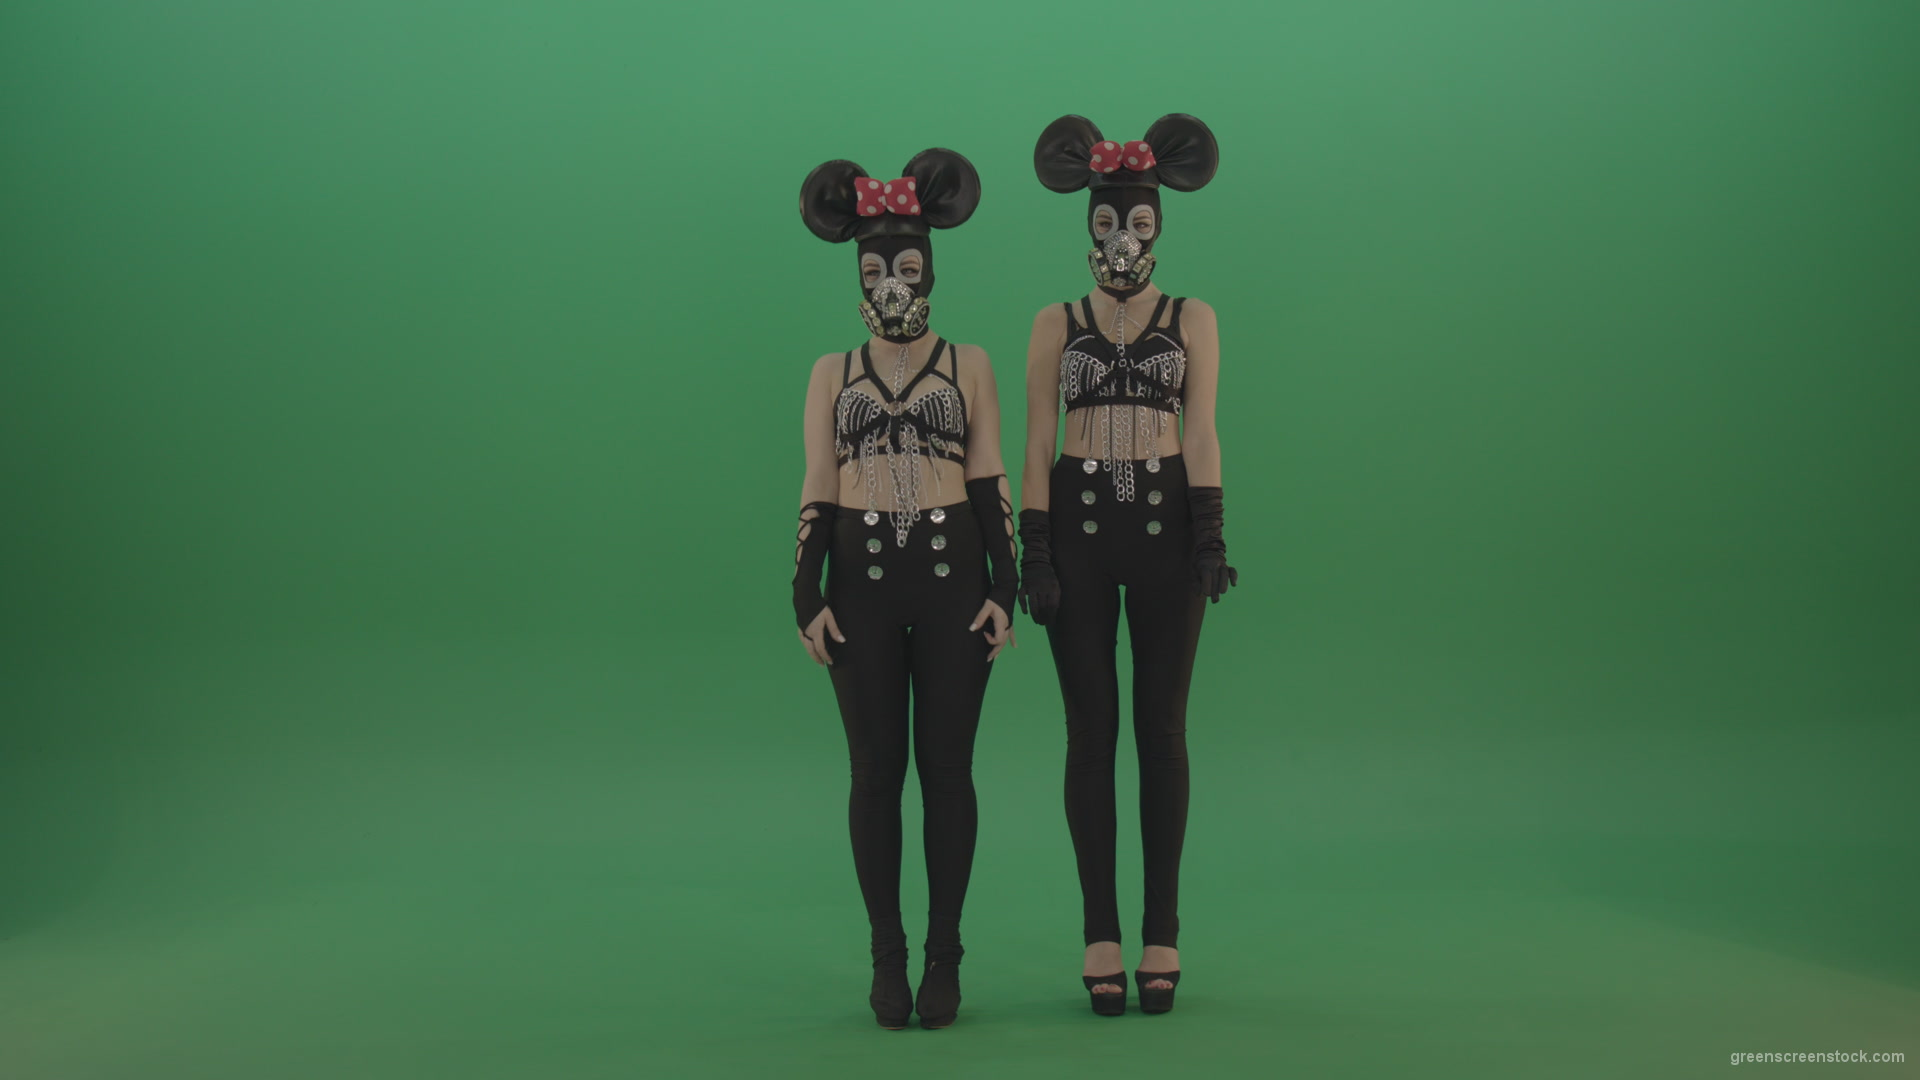 Two-girls-dressed-in-Mickey-Mouse-sit-squarelyon-green-screen_007 Green Screen Stock